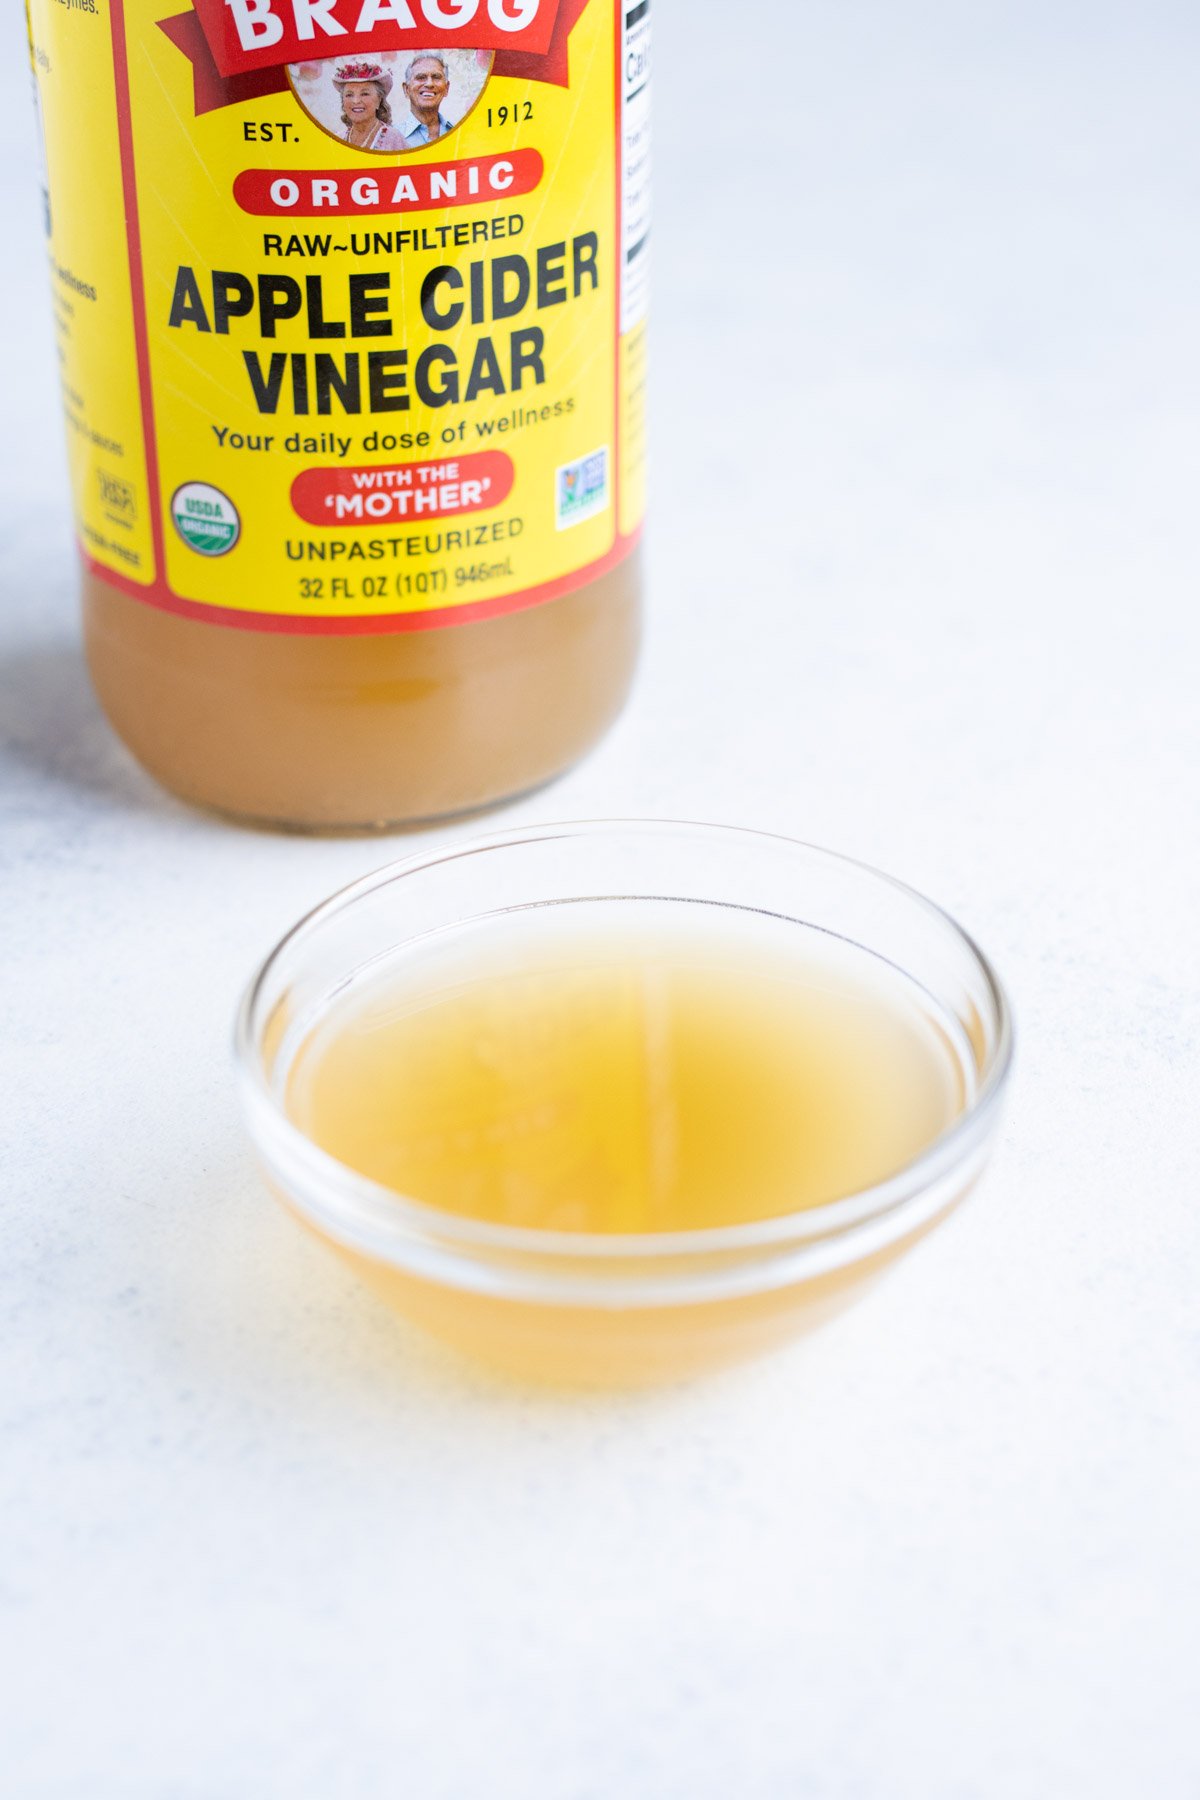 Apple cider vinegar in a small glass bowl with the container in the background.